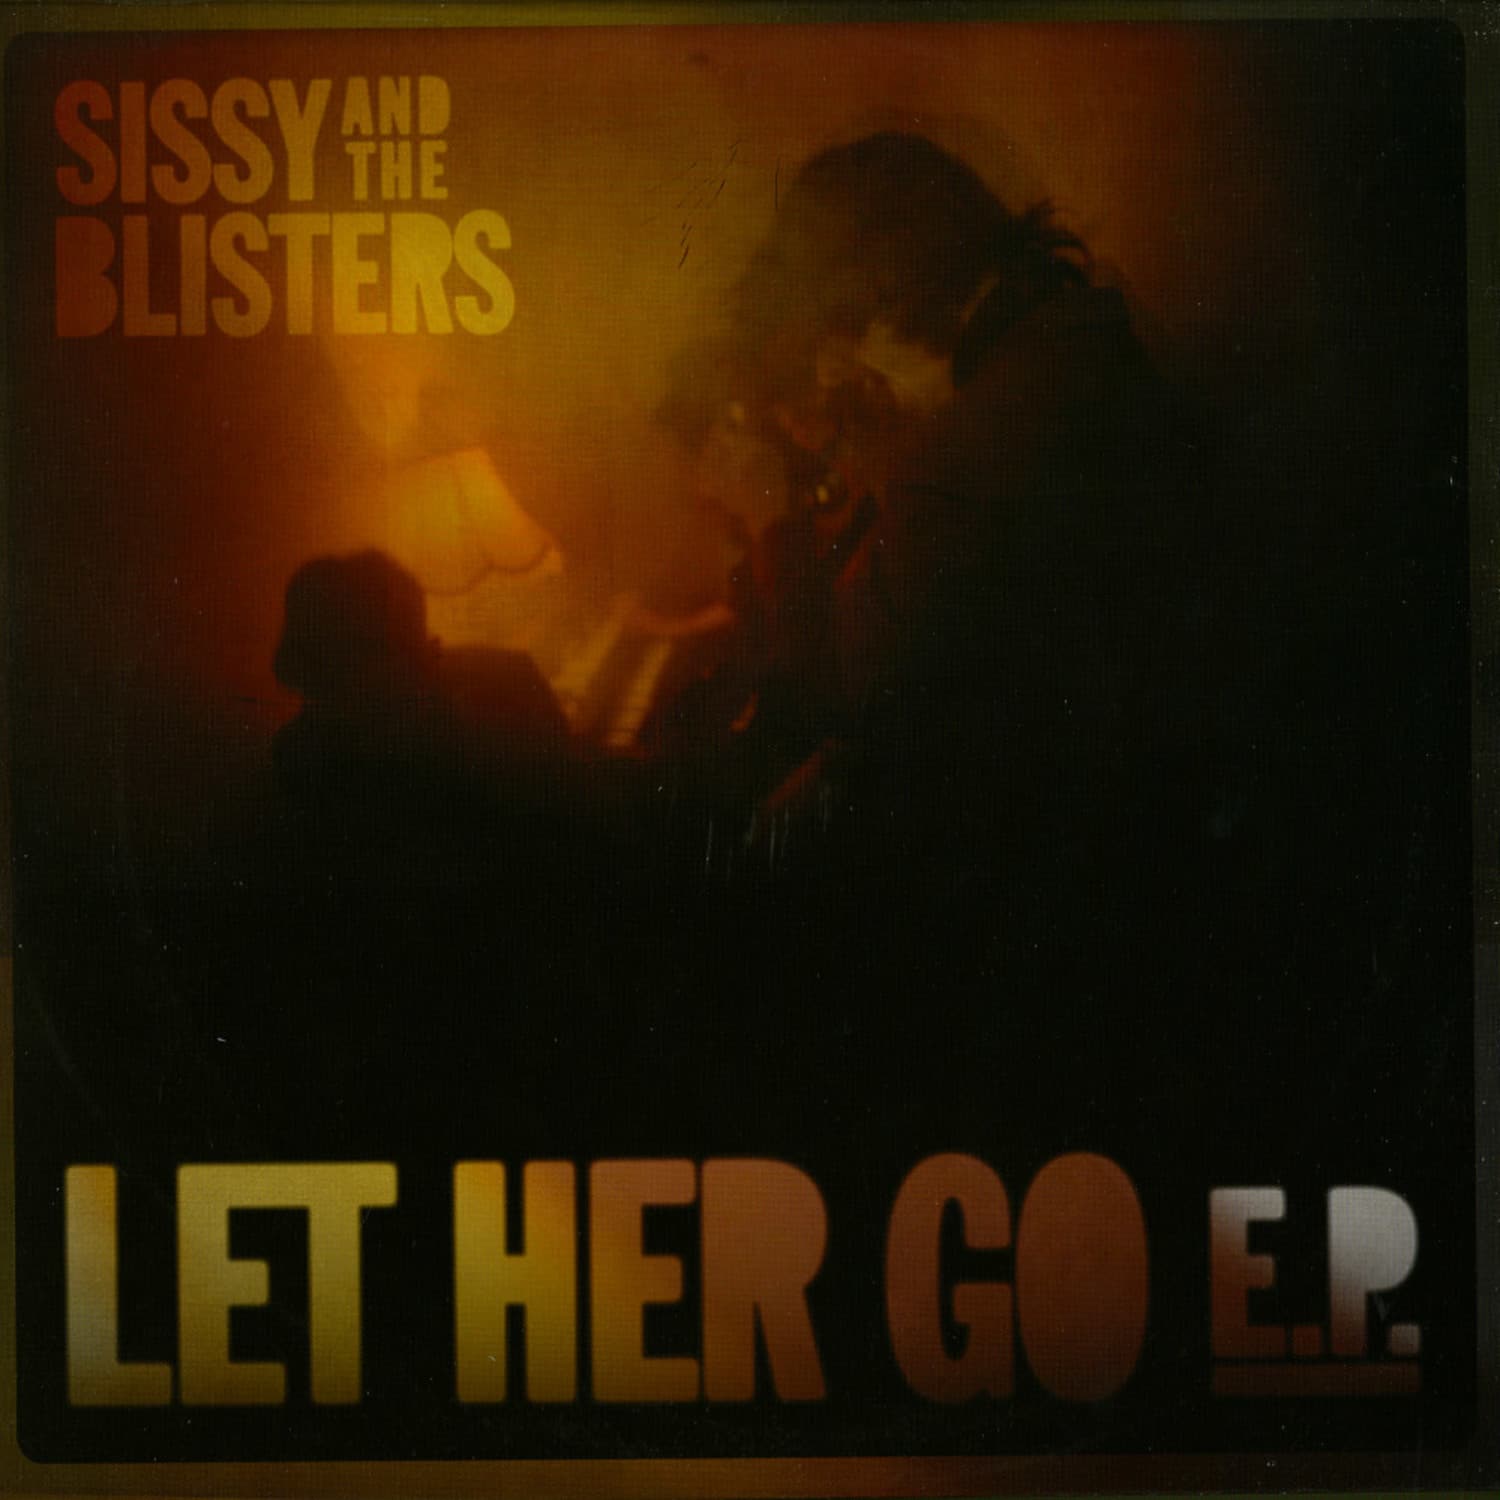 Sissy And The Blisters - LET HER GO EP 